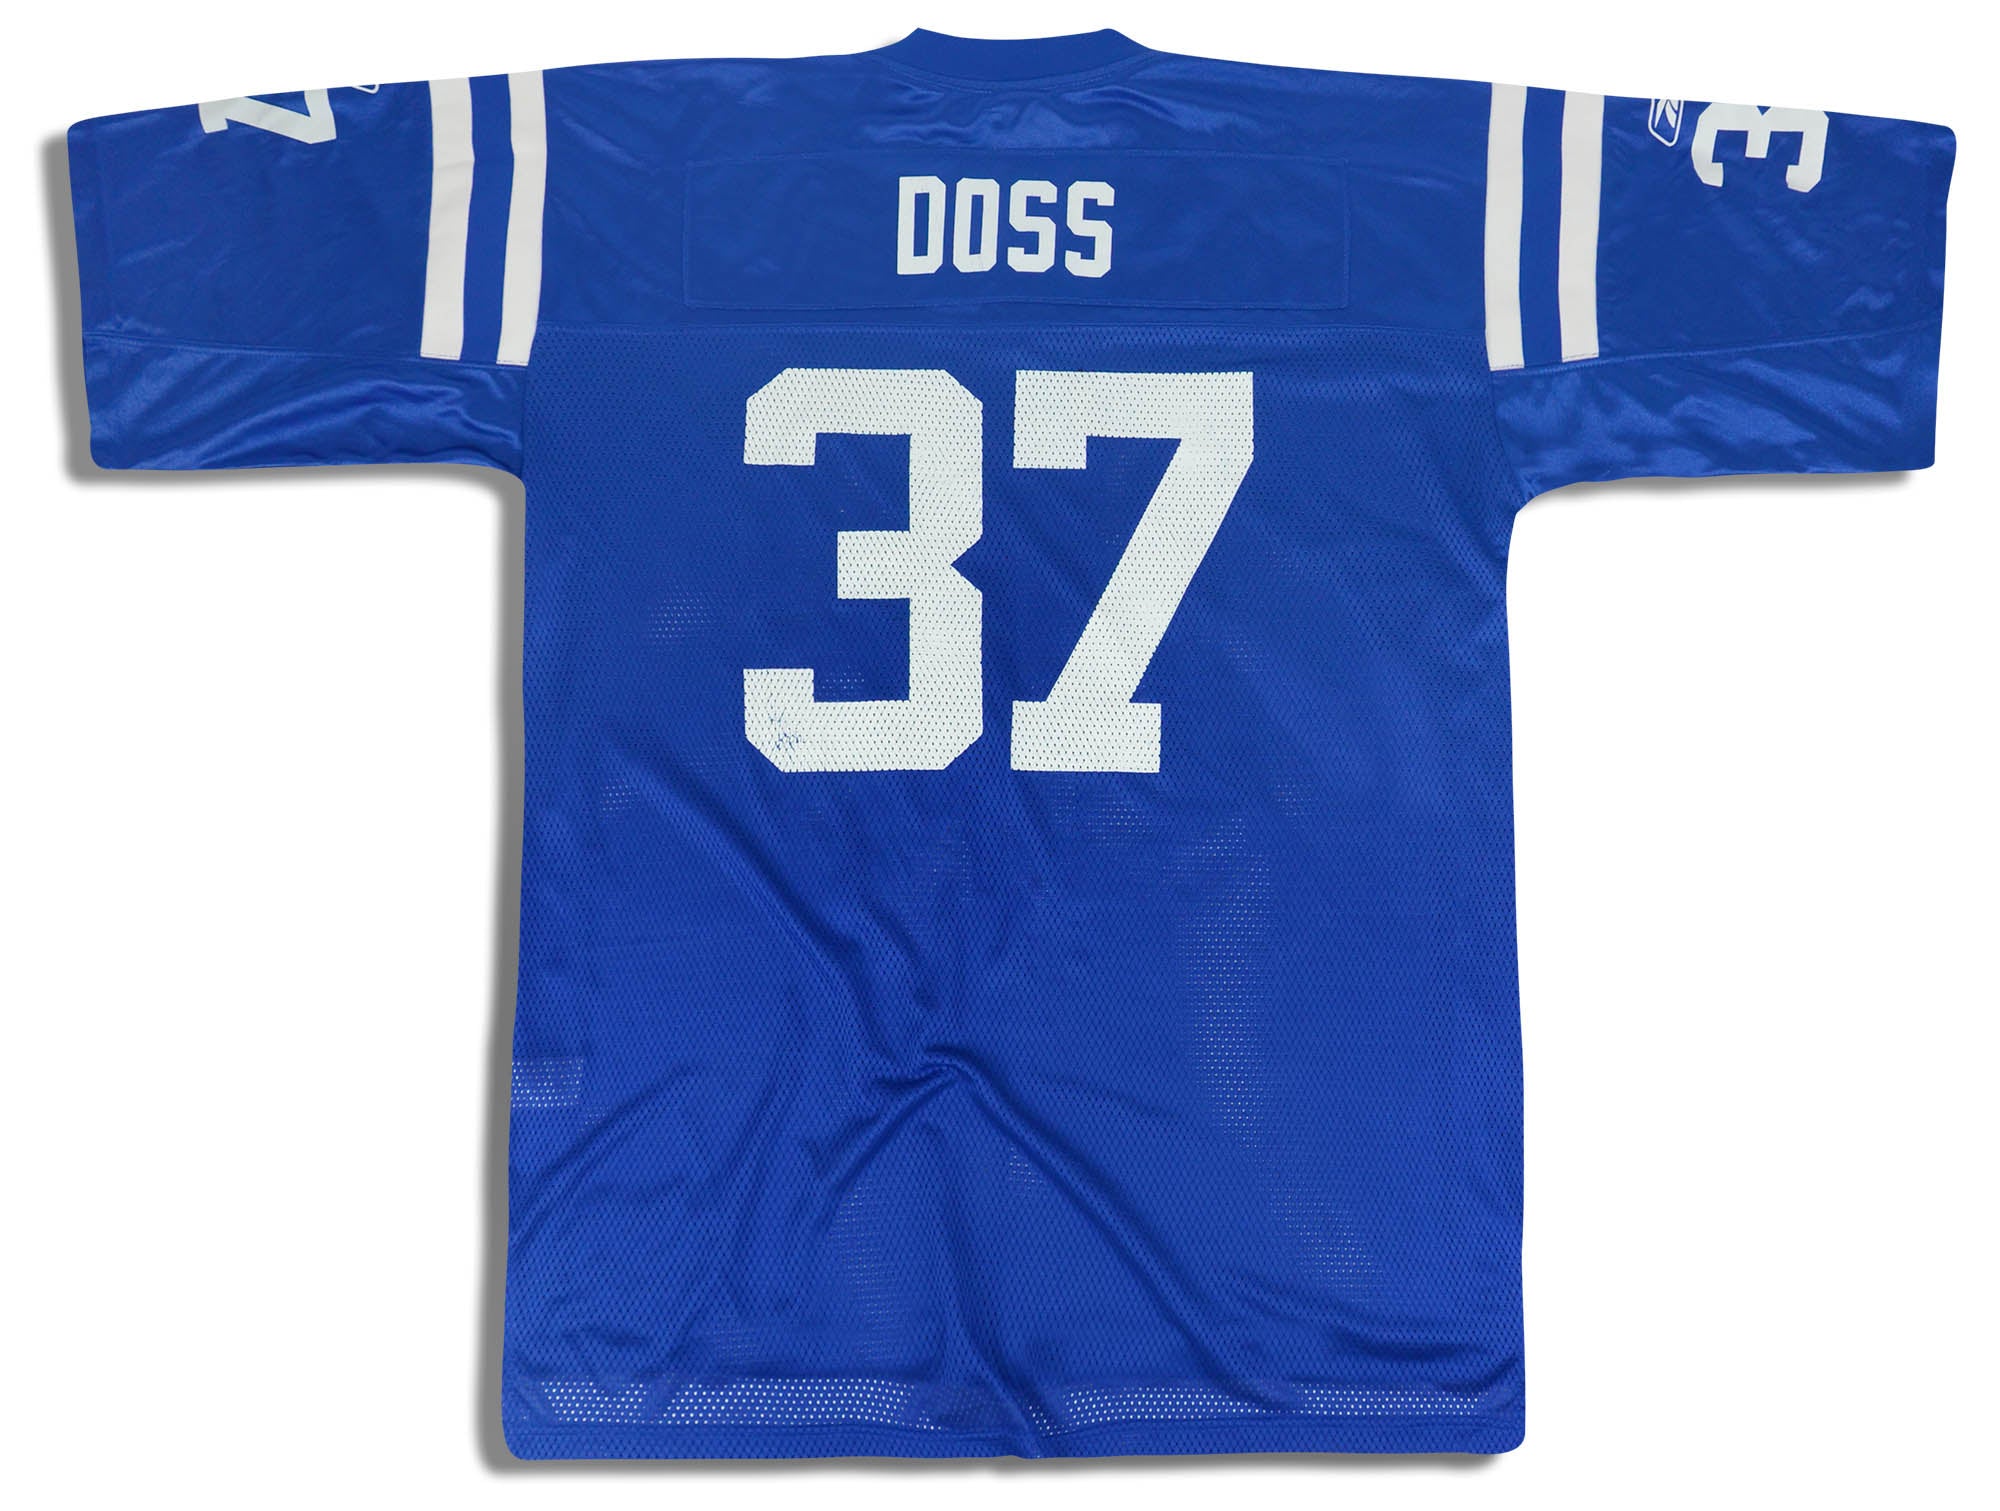 2002-04 INDIANAPOLIS COLTS DOSS #37 REEBOK ON FIELD JERSEY (HOME) XL